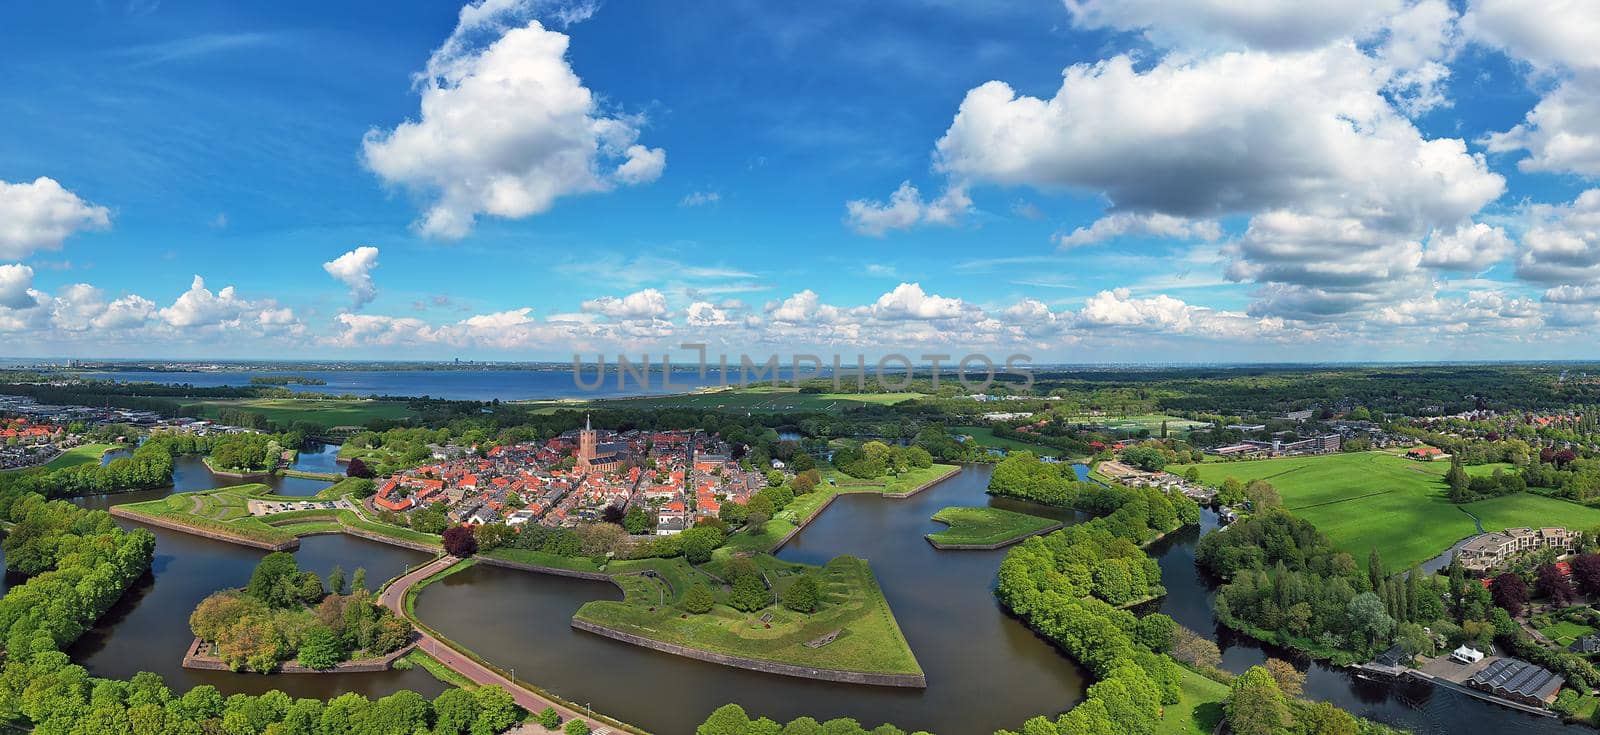 Aerial panorama from the medieval city Naarden in the Netherlands